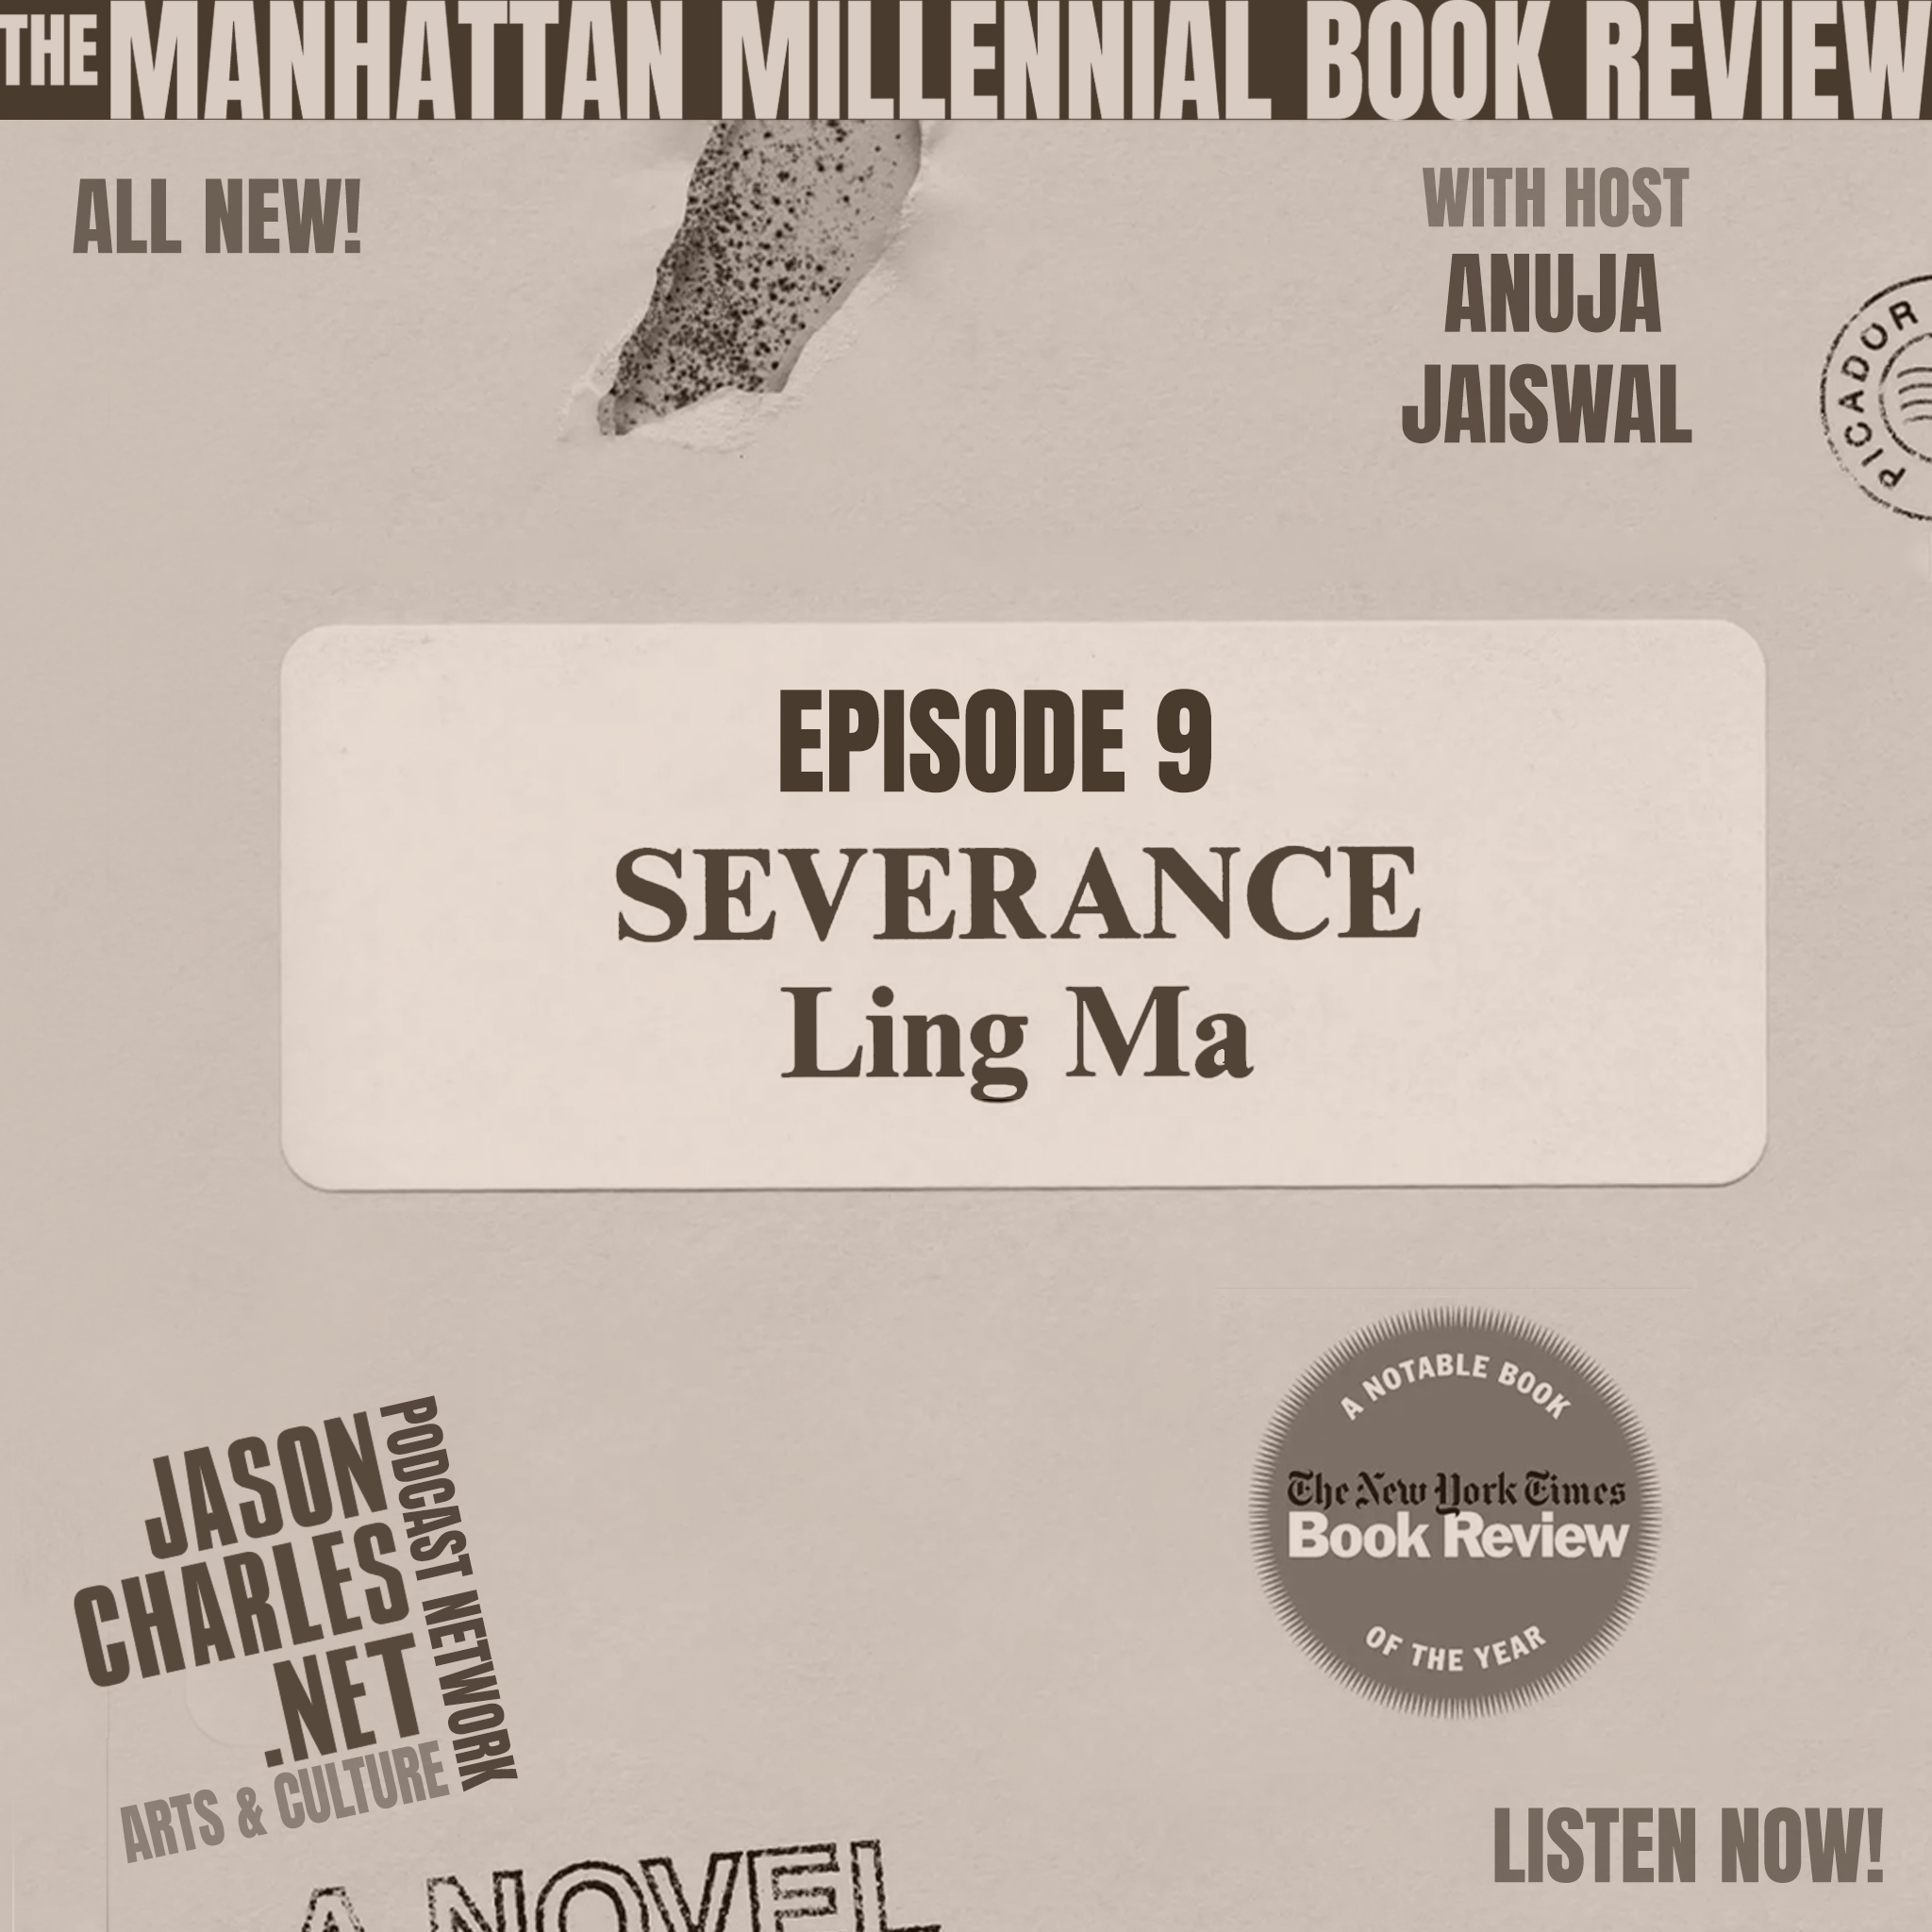 THE MANHATTAN MILLENNIAL BOOK REVIEW Episode 9 Severance by Ling Ma